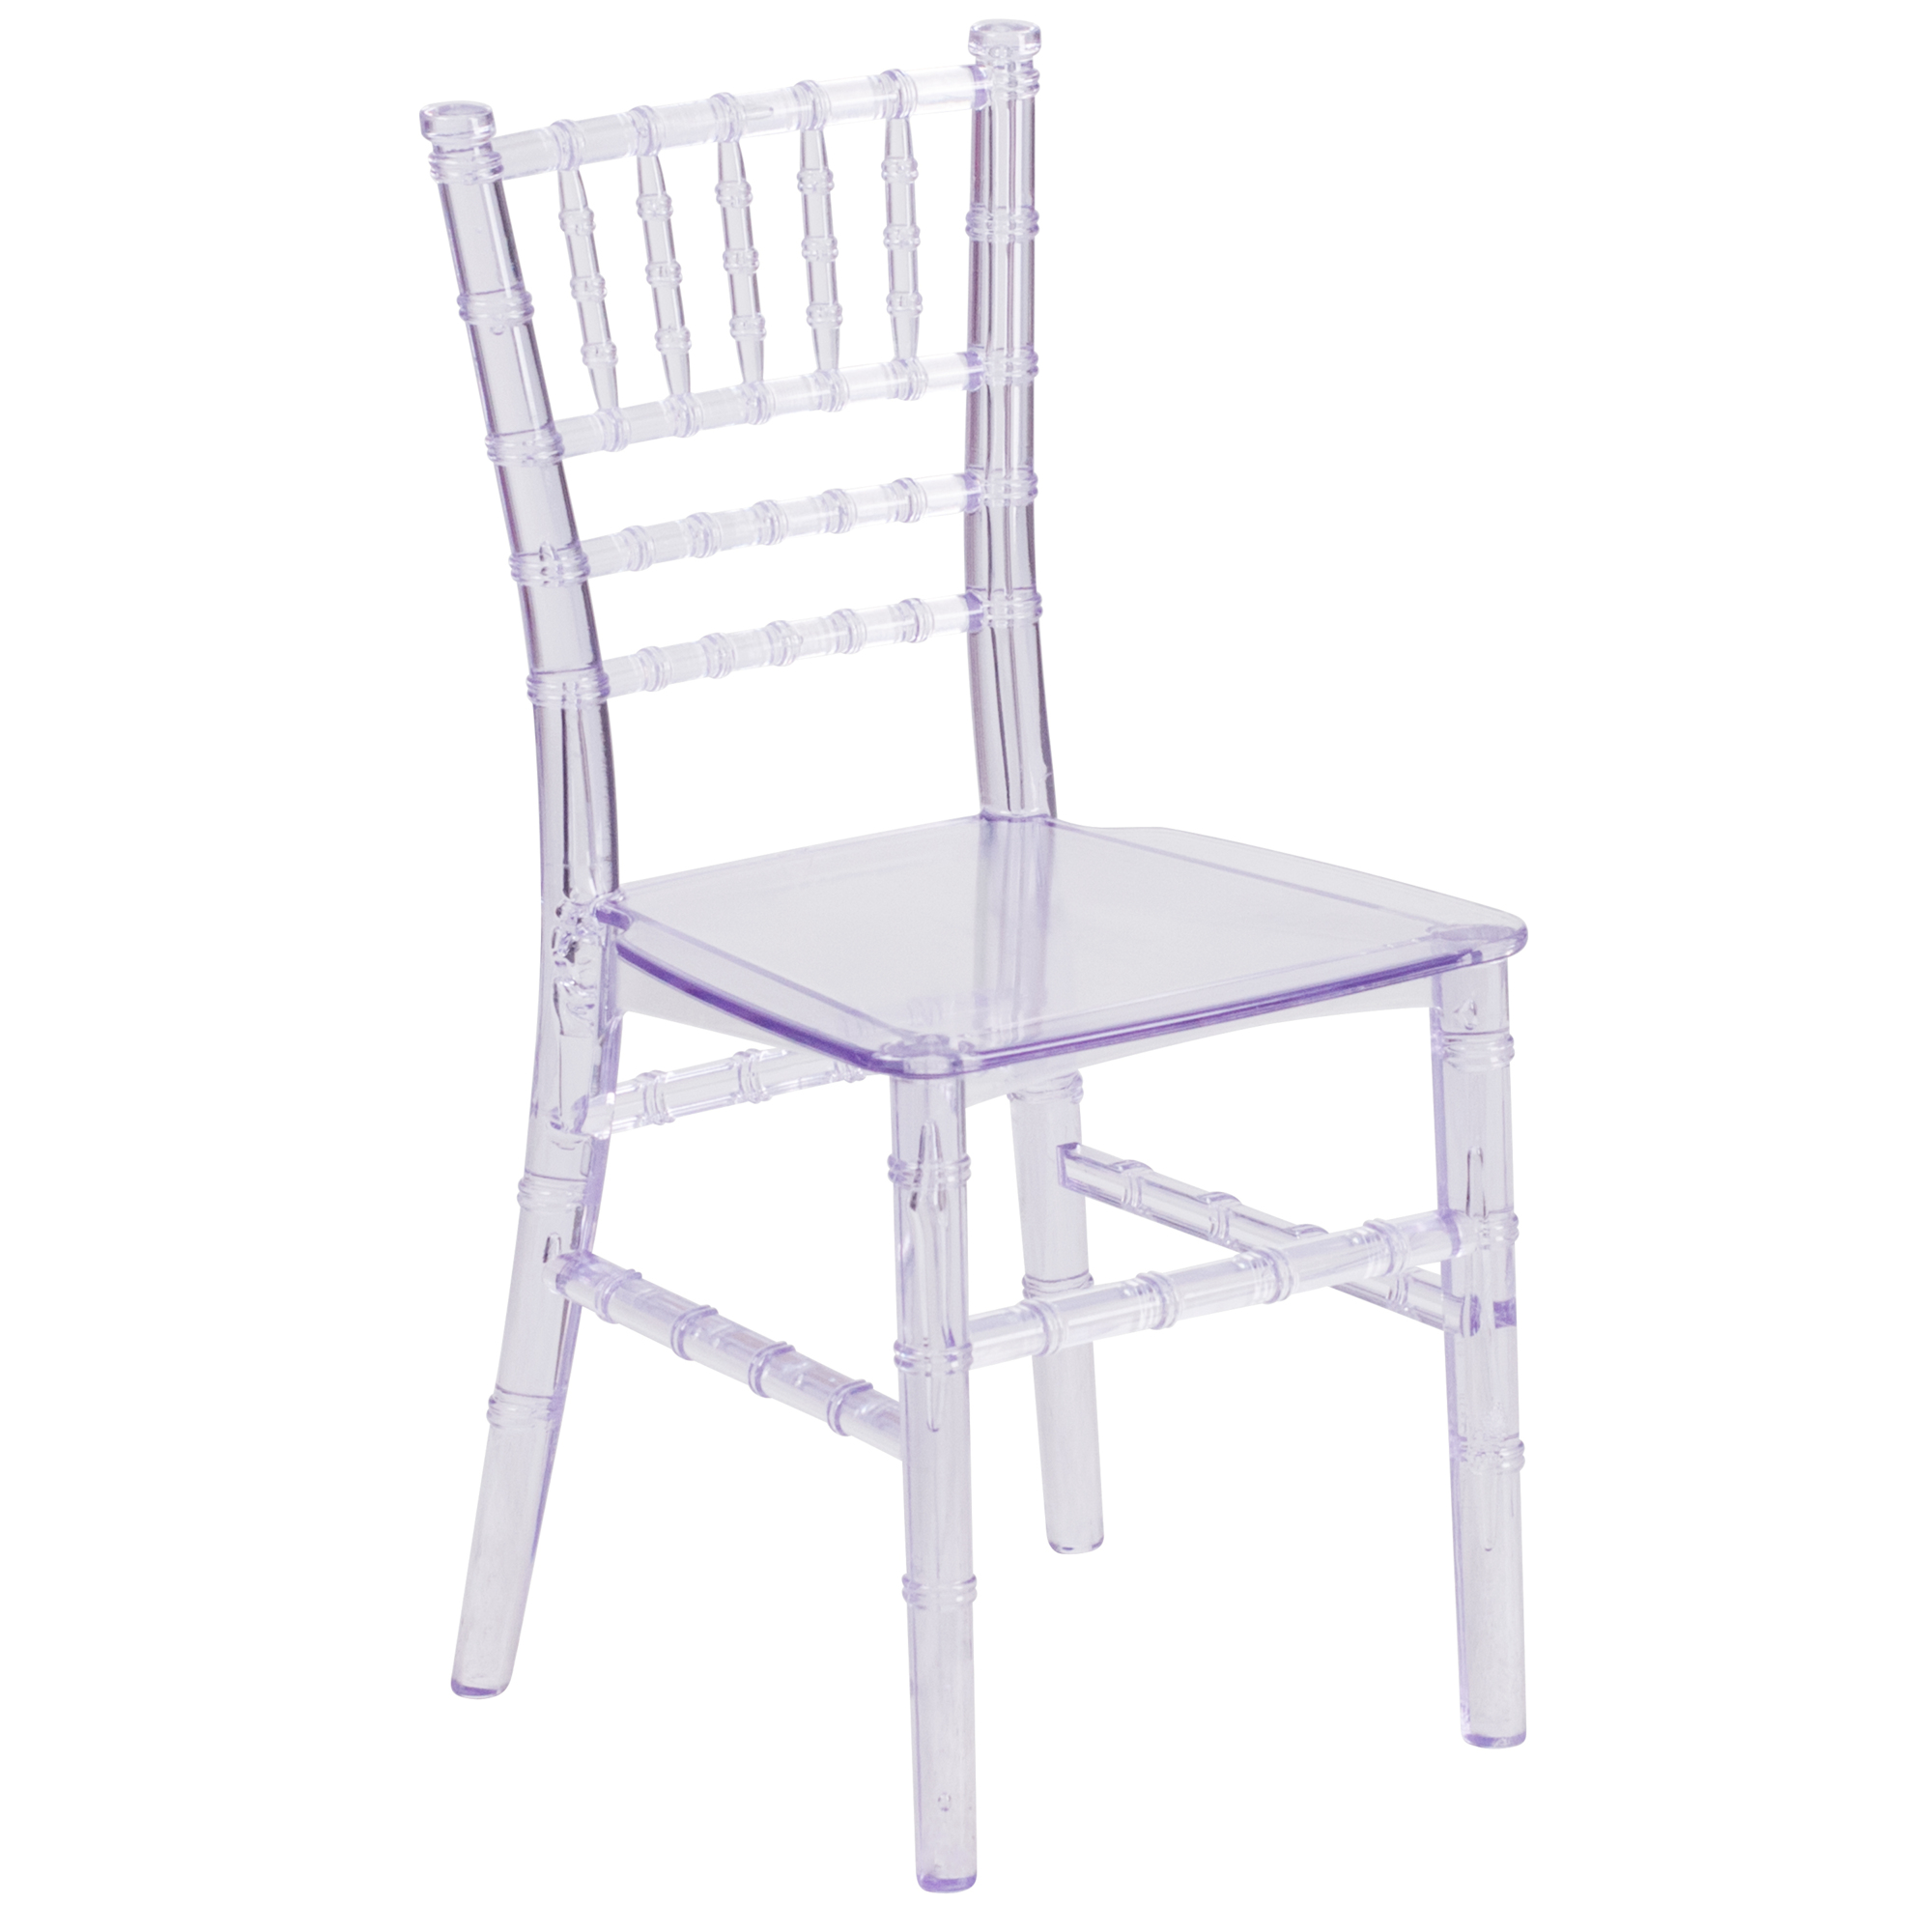 Flash Furniture, Child's Crystal Chiavari Chair - Event Chair, Primary Color Clear, Included (qty.) 1, Model LEL7KCL